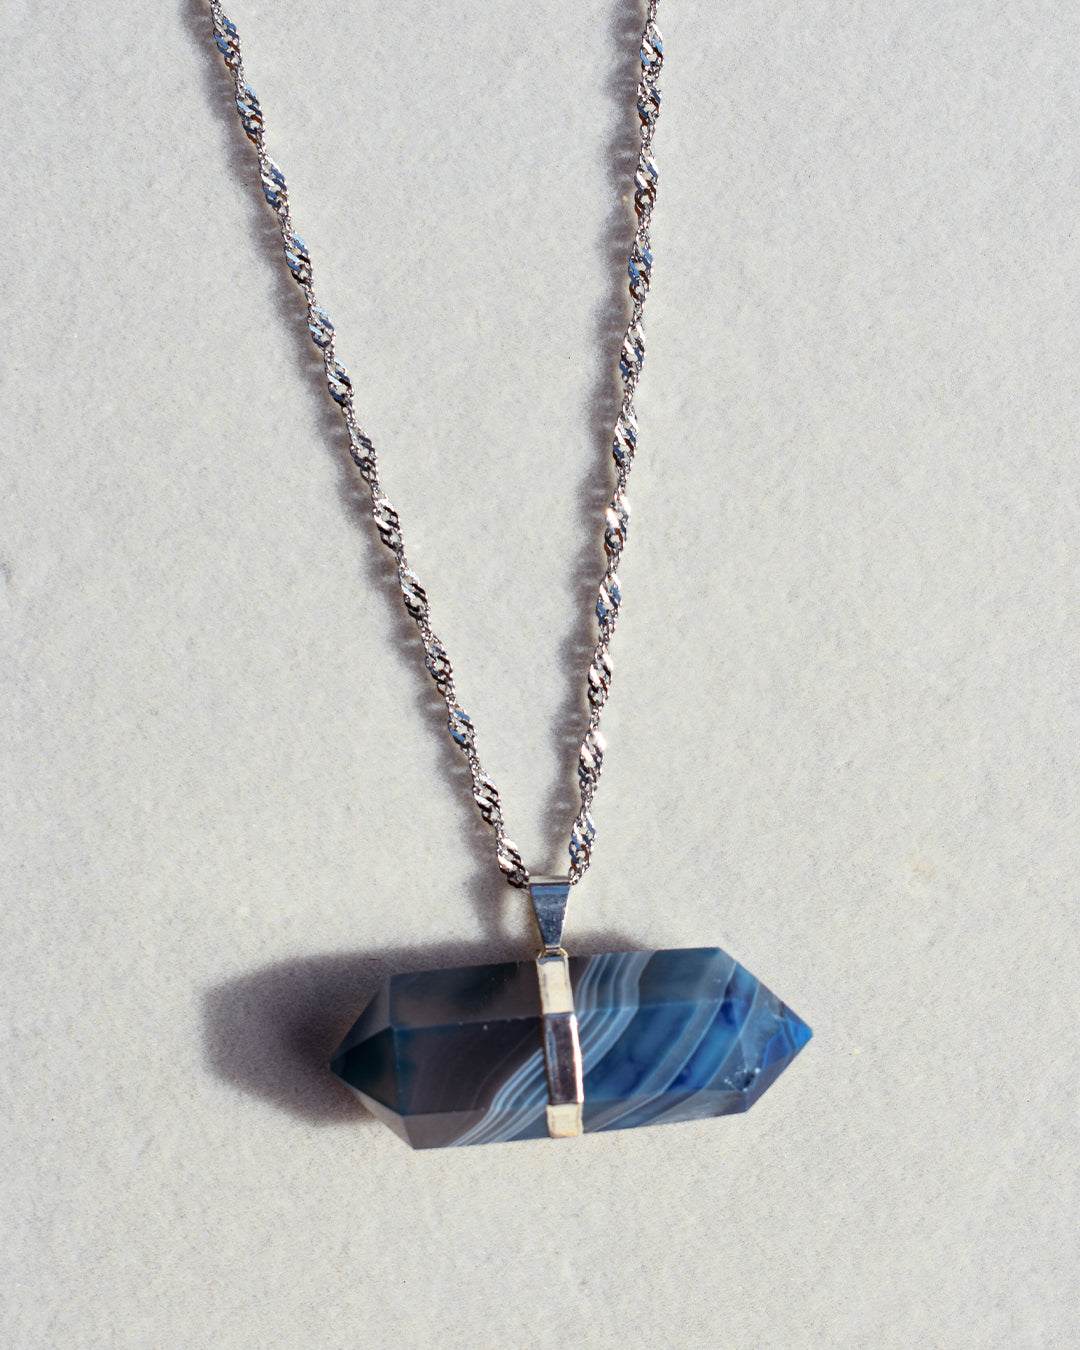 Stainless Steel chain with Blue Agate crystal pendant